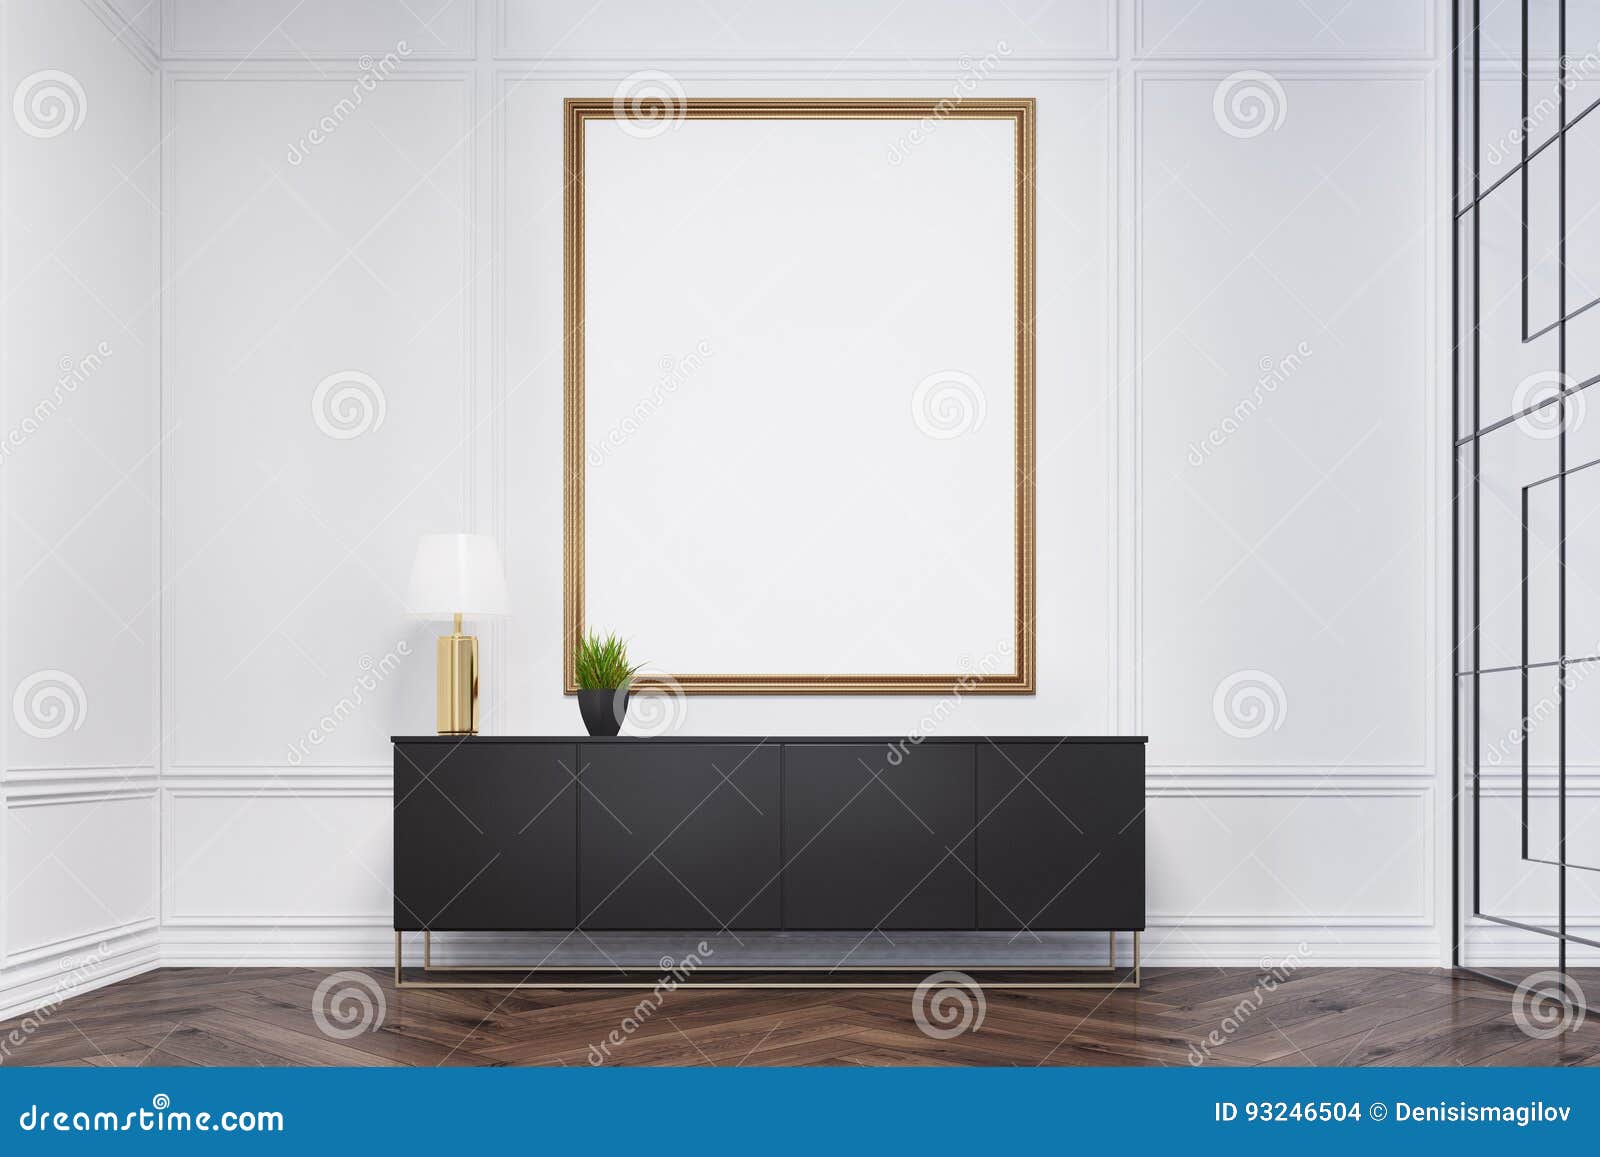 Dresser With Lamp And Poster Stock Illustration Illustration Of